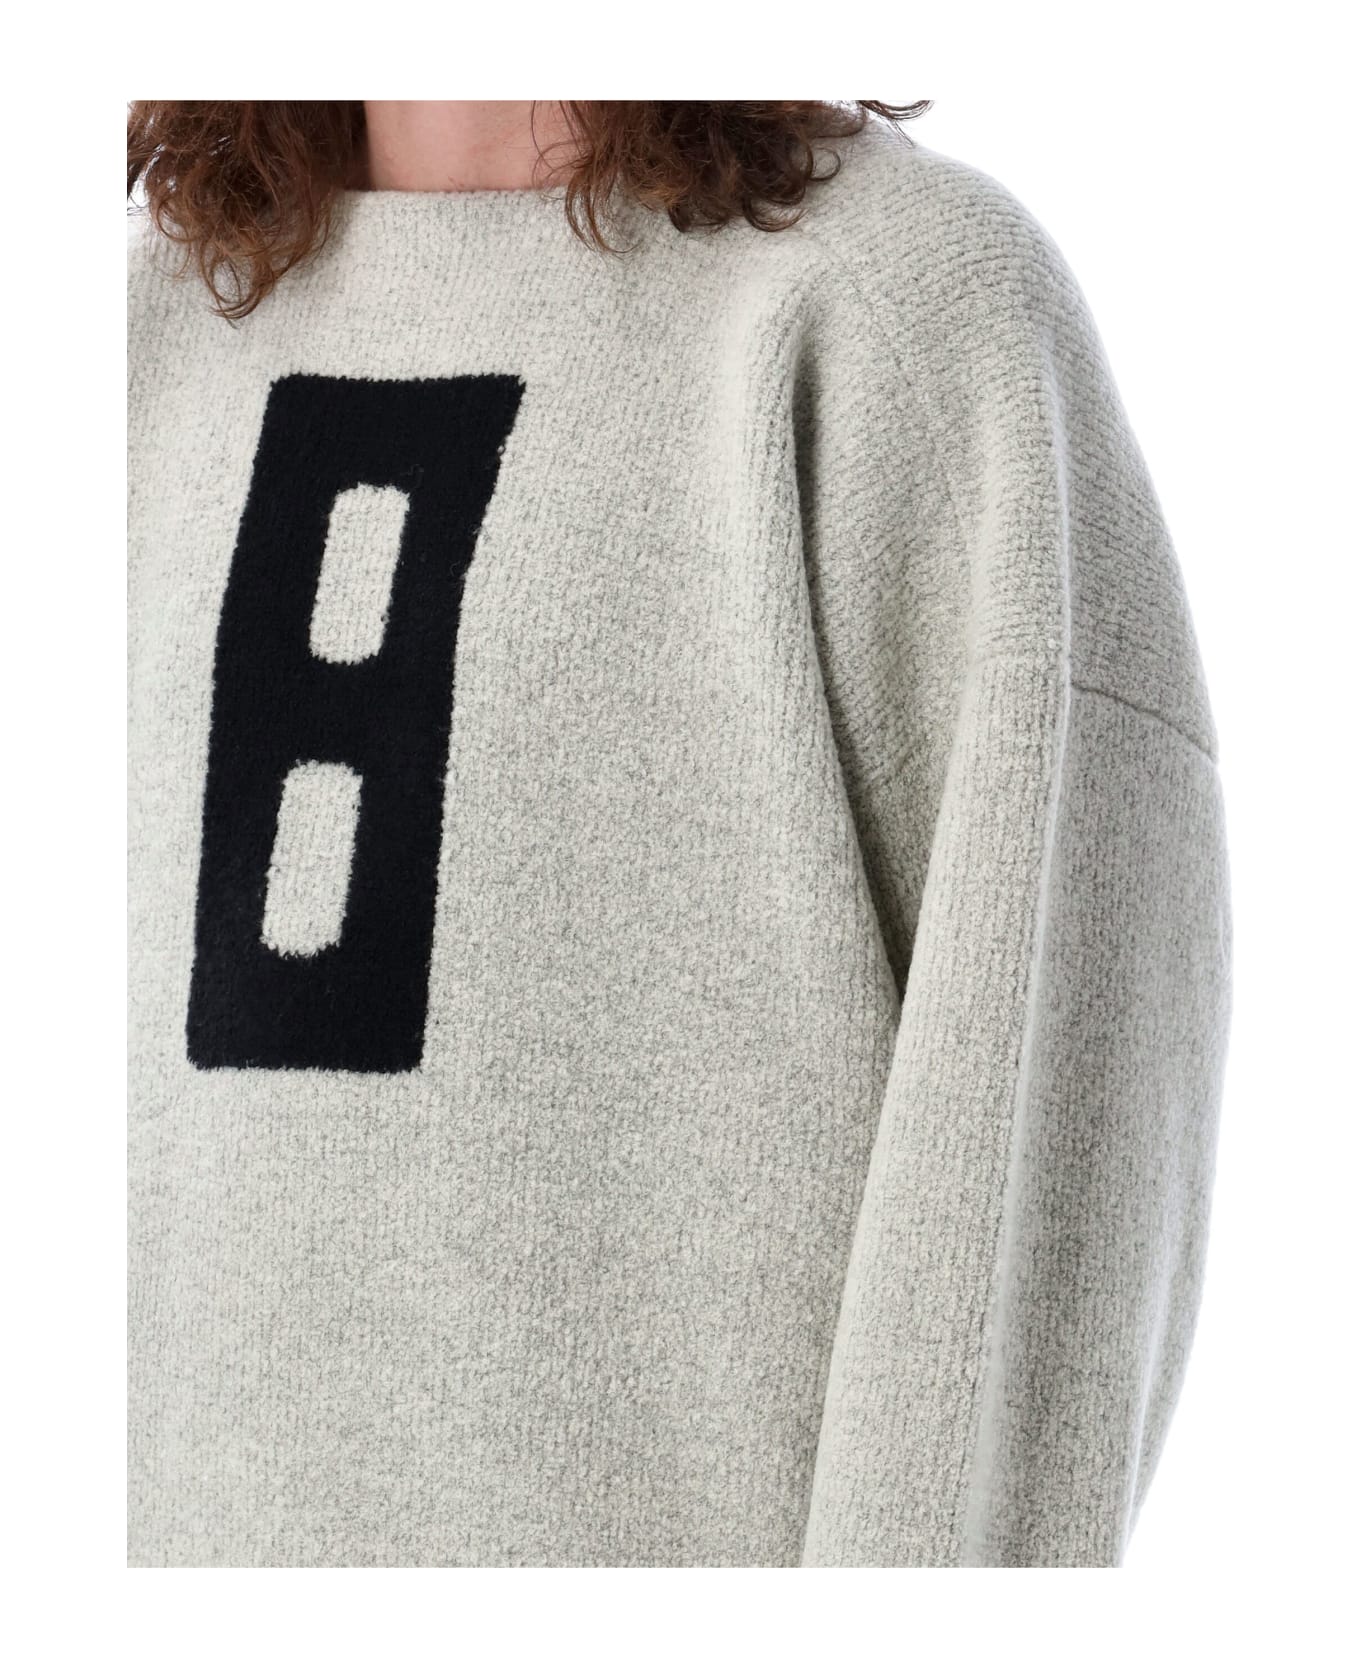 Fear of God Boucle Straight Neck Sweater - DOVE GREY